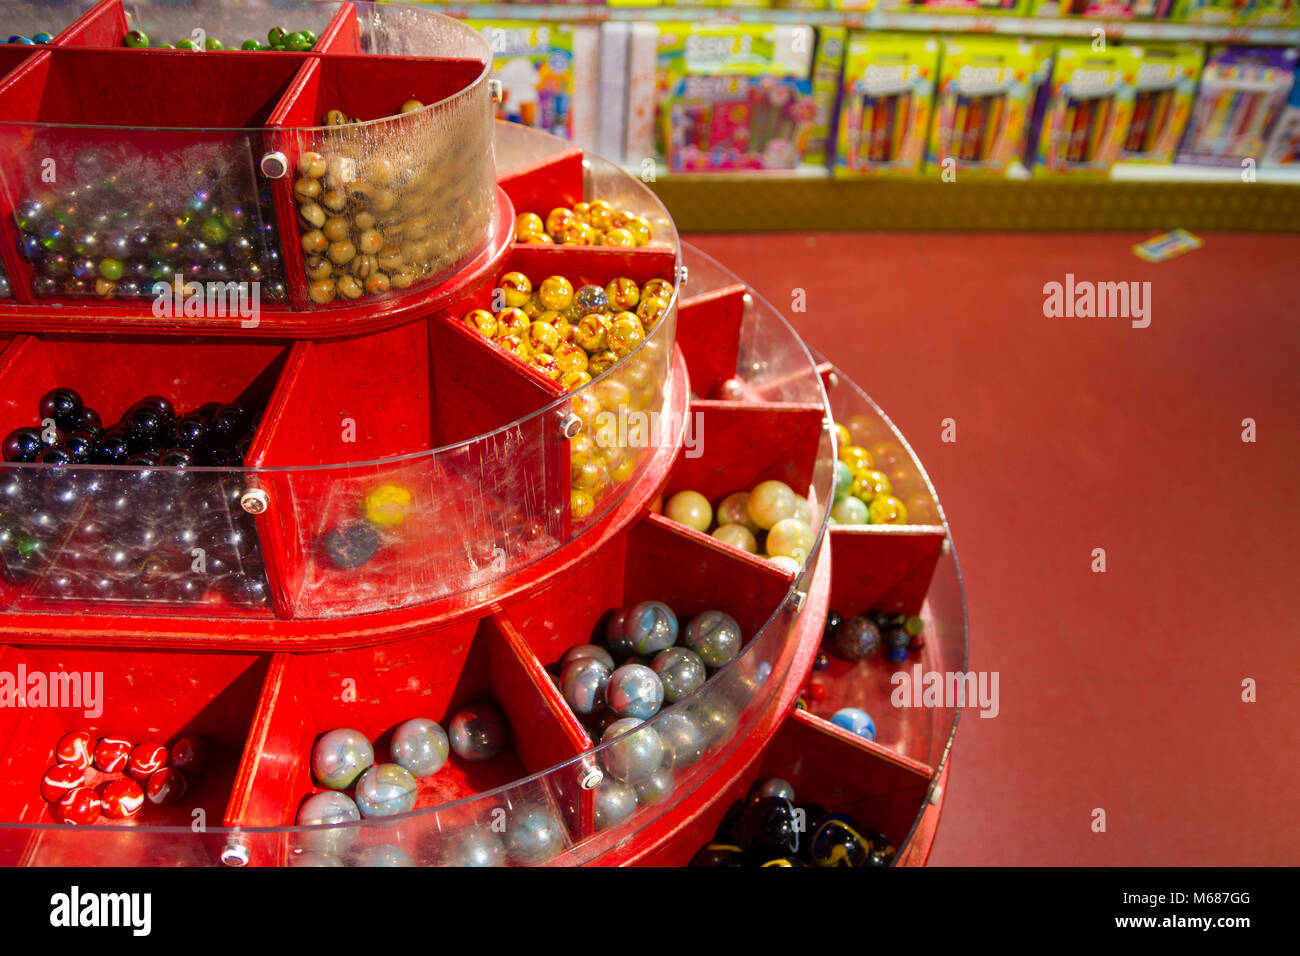 The new Pictionary Air on display during the Hamleys Christmas toy showcase  at Hamleys, Regent Street, London Stock Photo - Alamy